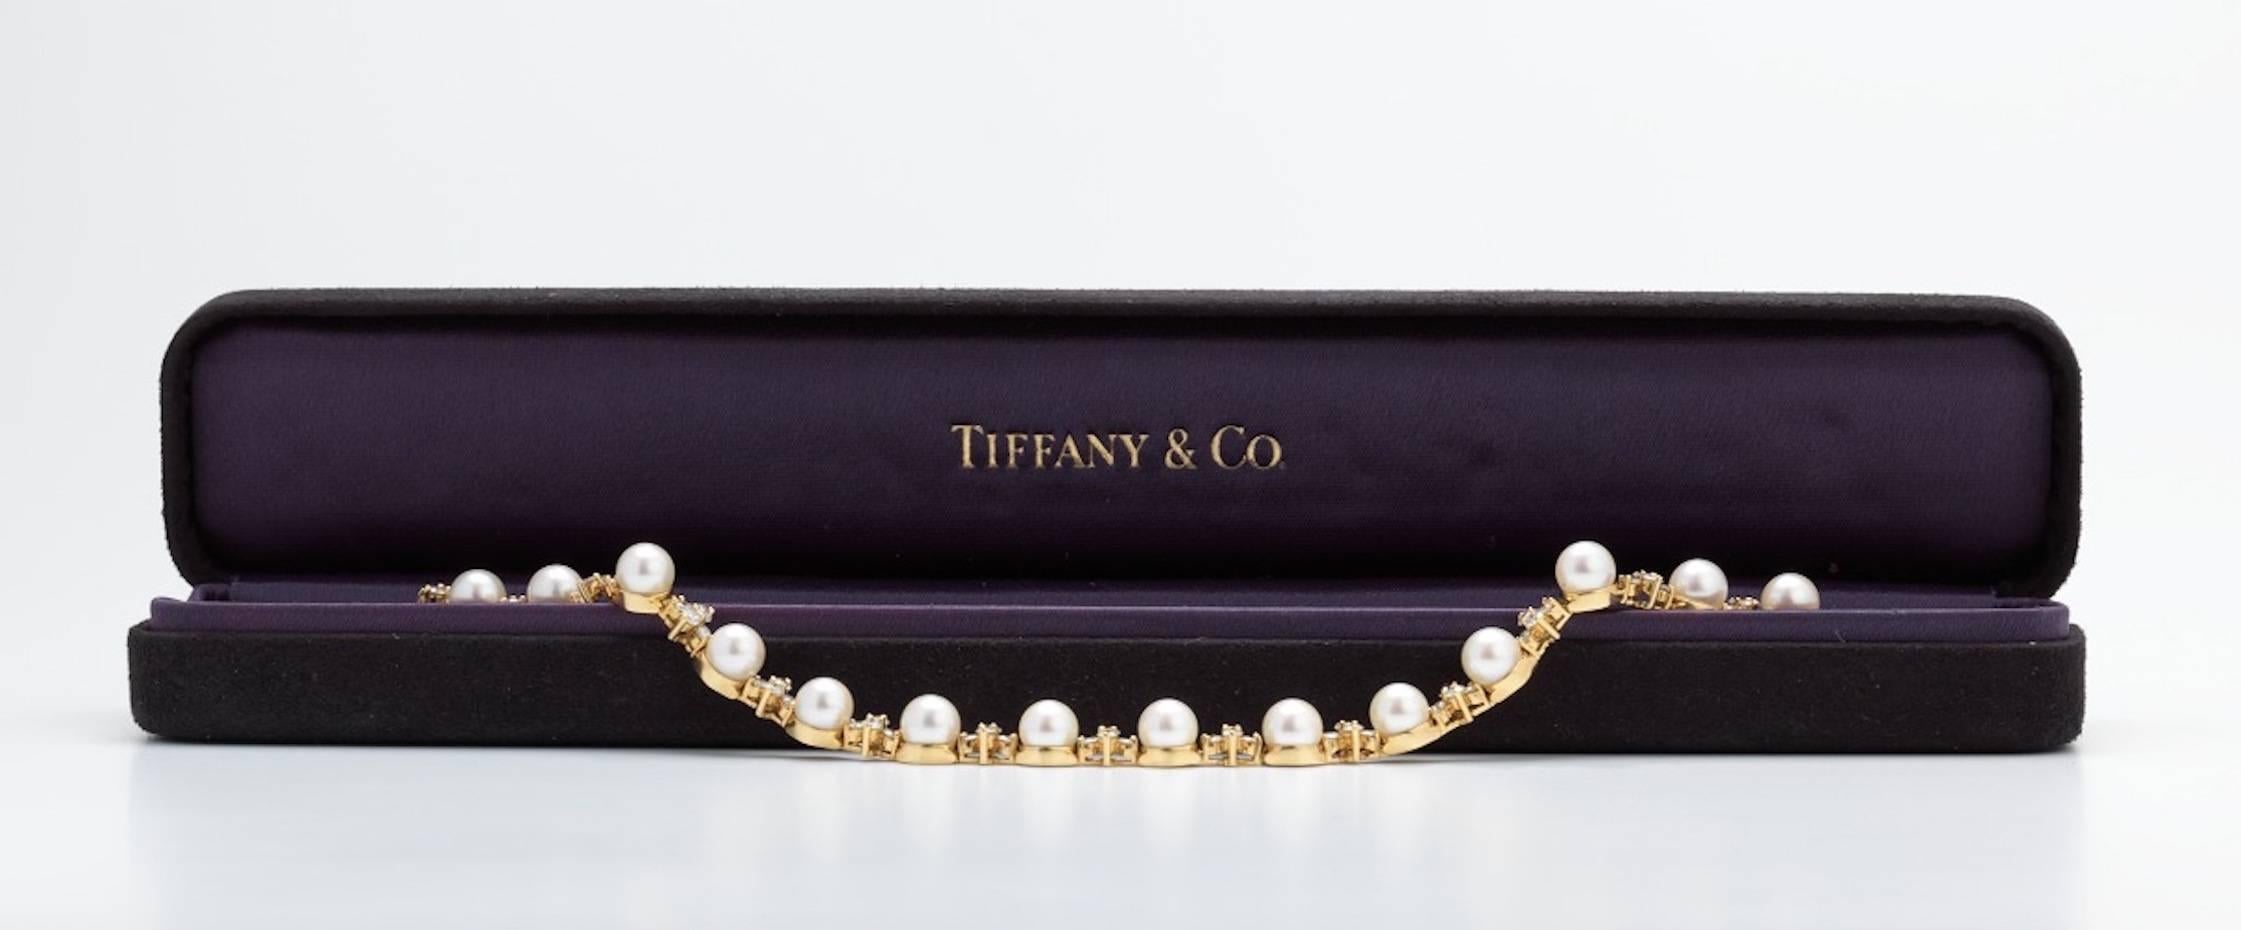 This iconic and rare stunning Tiffany & Co. bracelet is set in 18k gold (yellow) with an amazing array of alternating 6mm freshwater cultured pearls and alternating round brilliant cut diamond clusters.  The total estimated diamond weight is